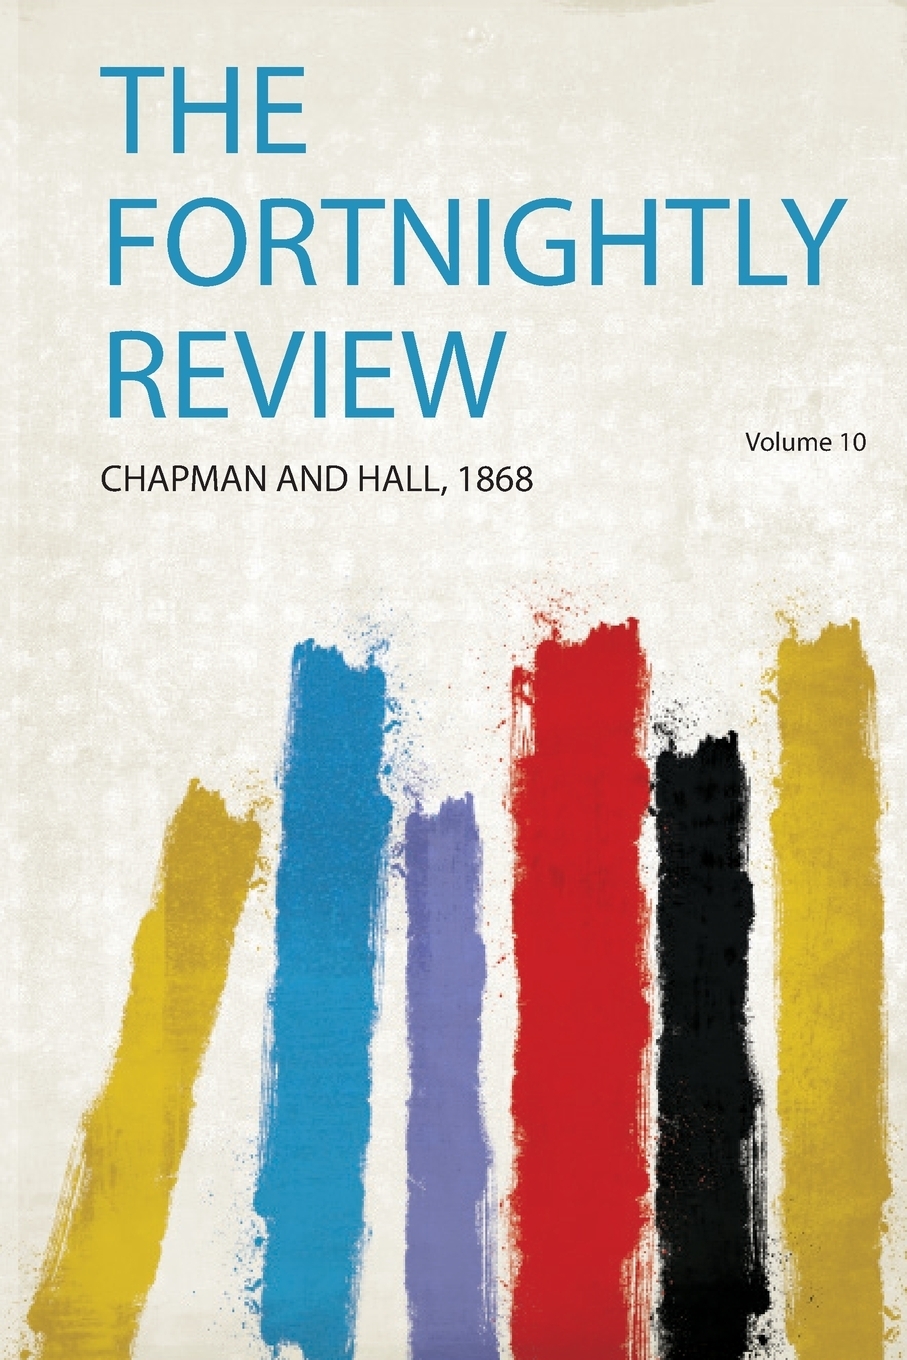 The Fortnightly Review